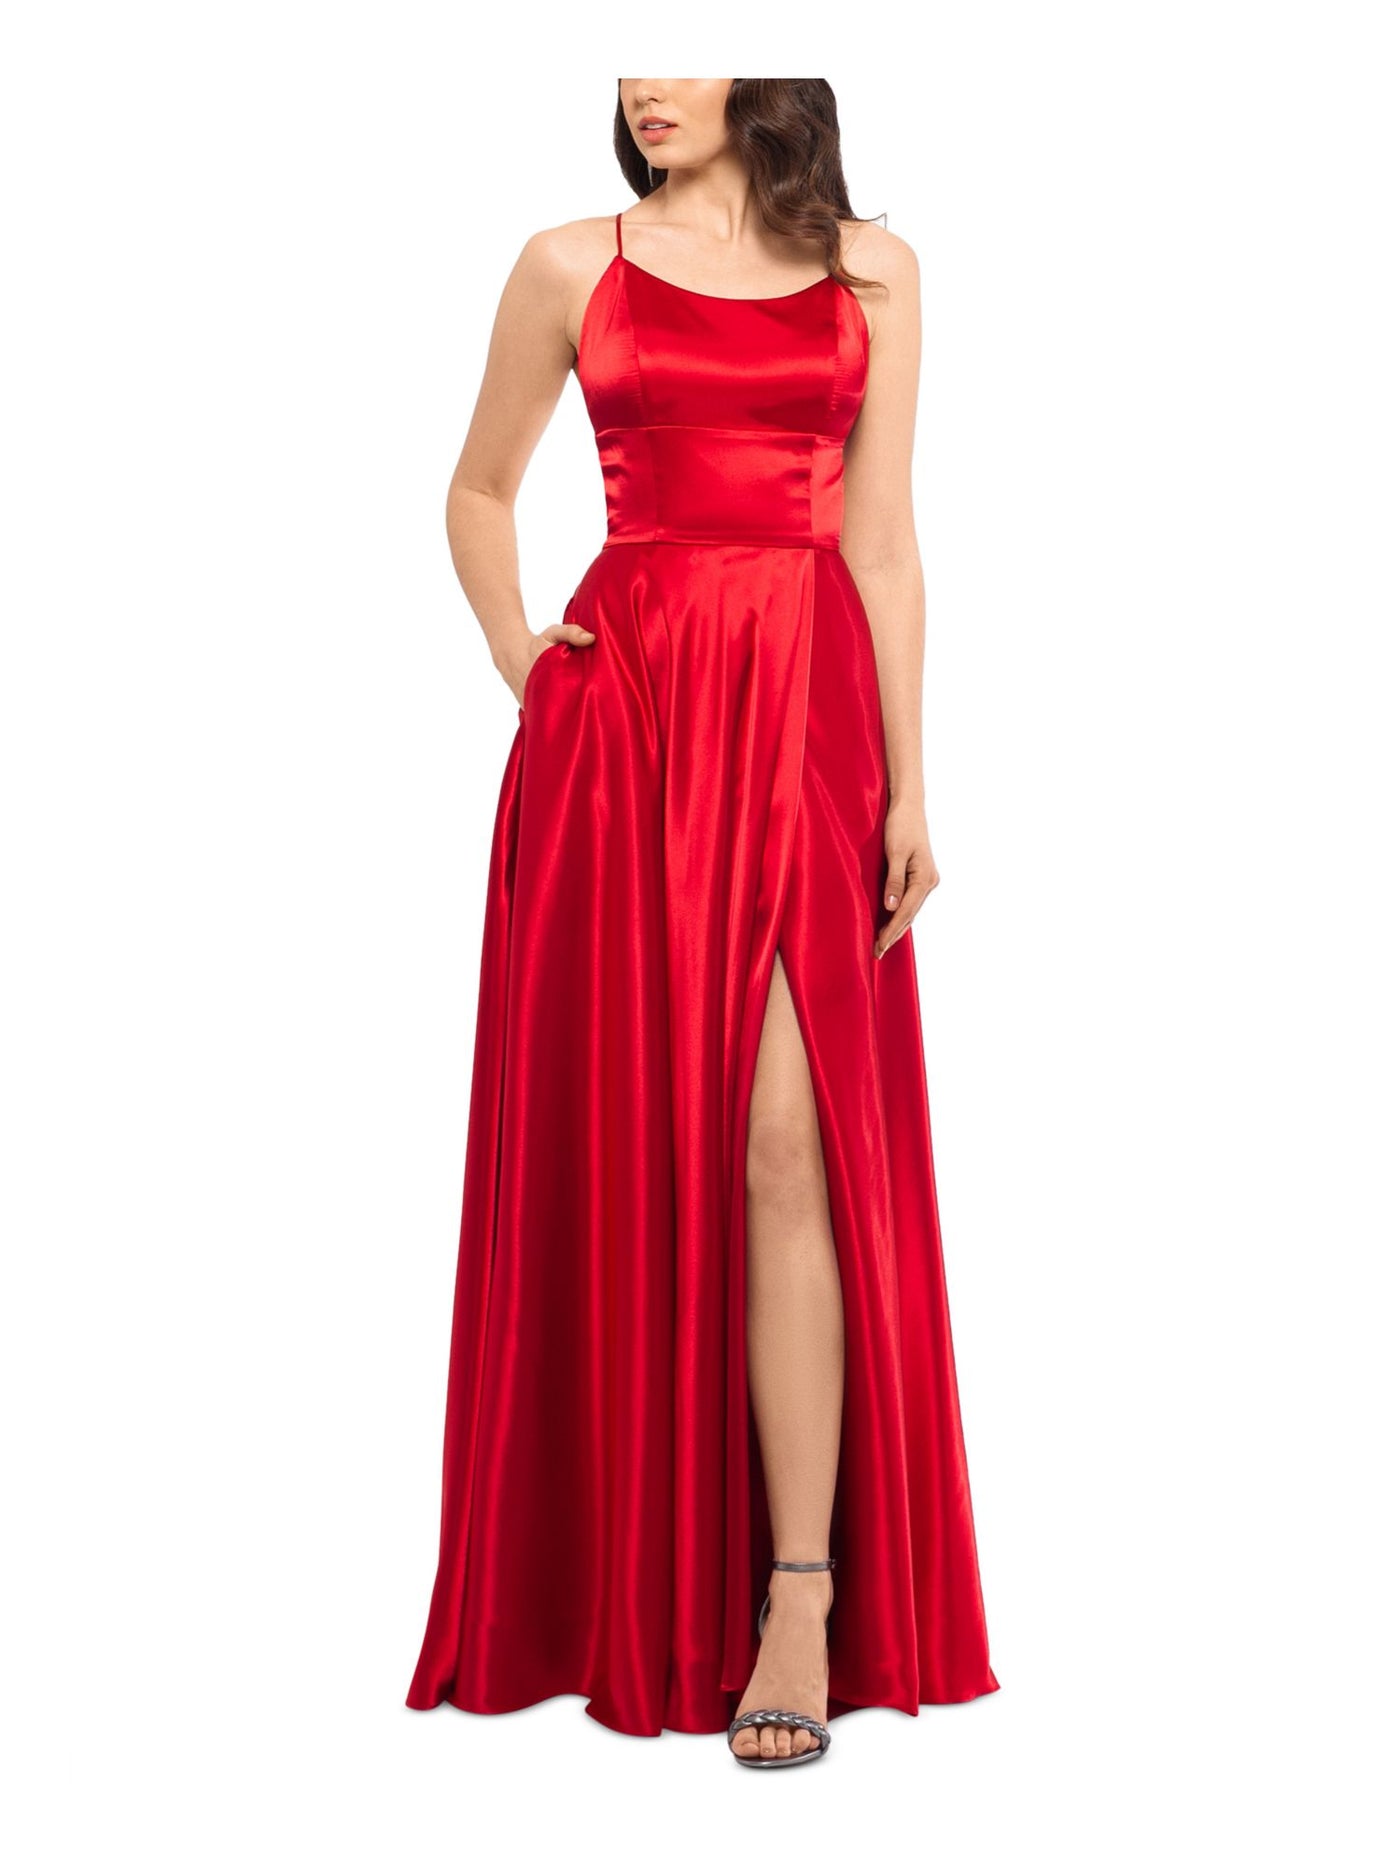 B&A  BY BETSY & ADAM Womens Red Satin Zippered Lined Pocketed Slitted Spaghetti Strap Scoop Neck Full-Length Formal Gown Dress Petites 0P